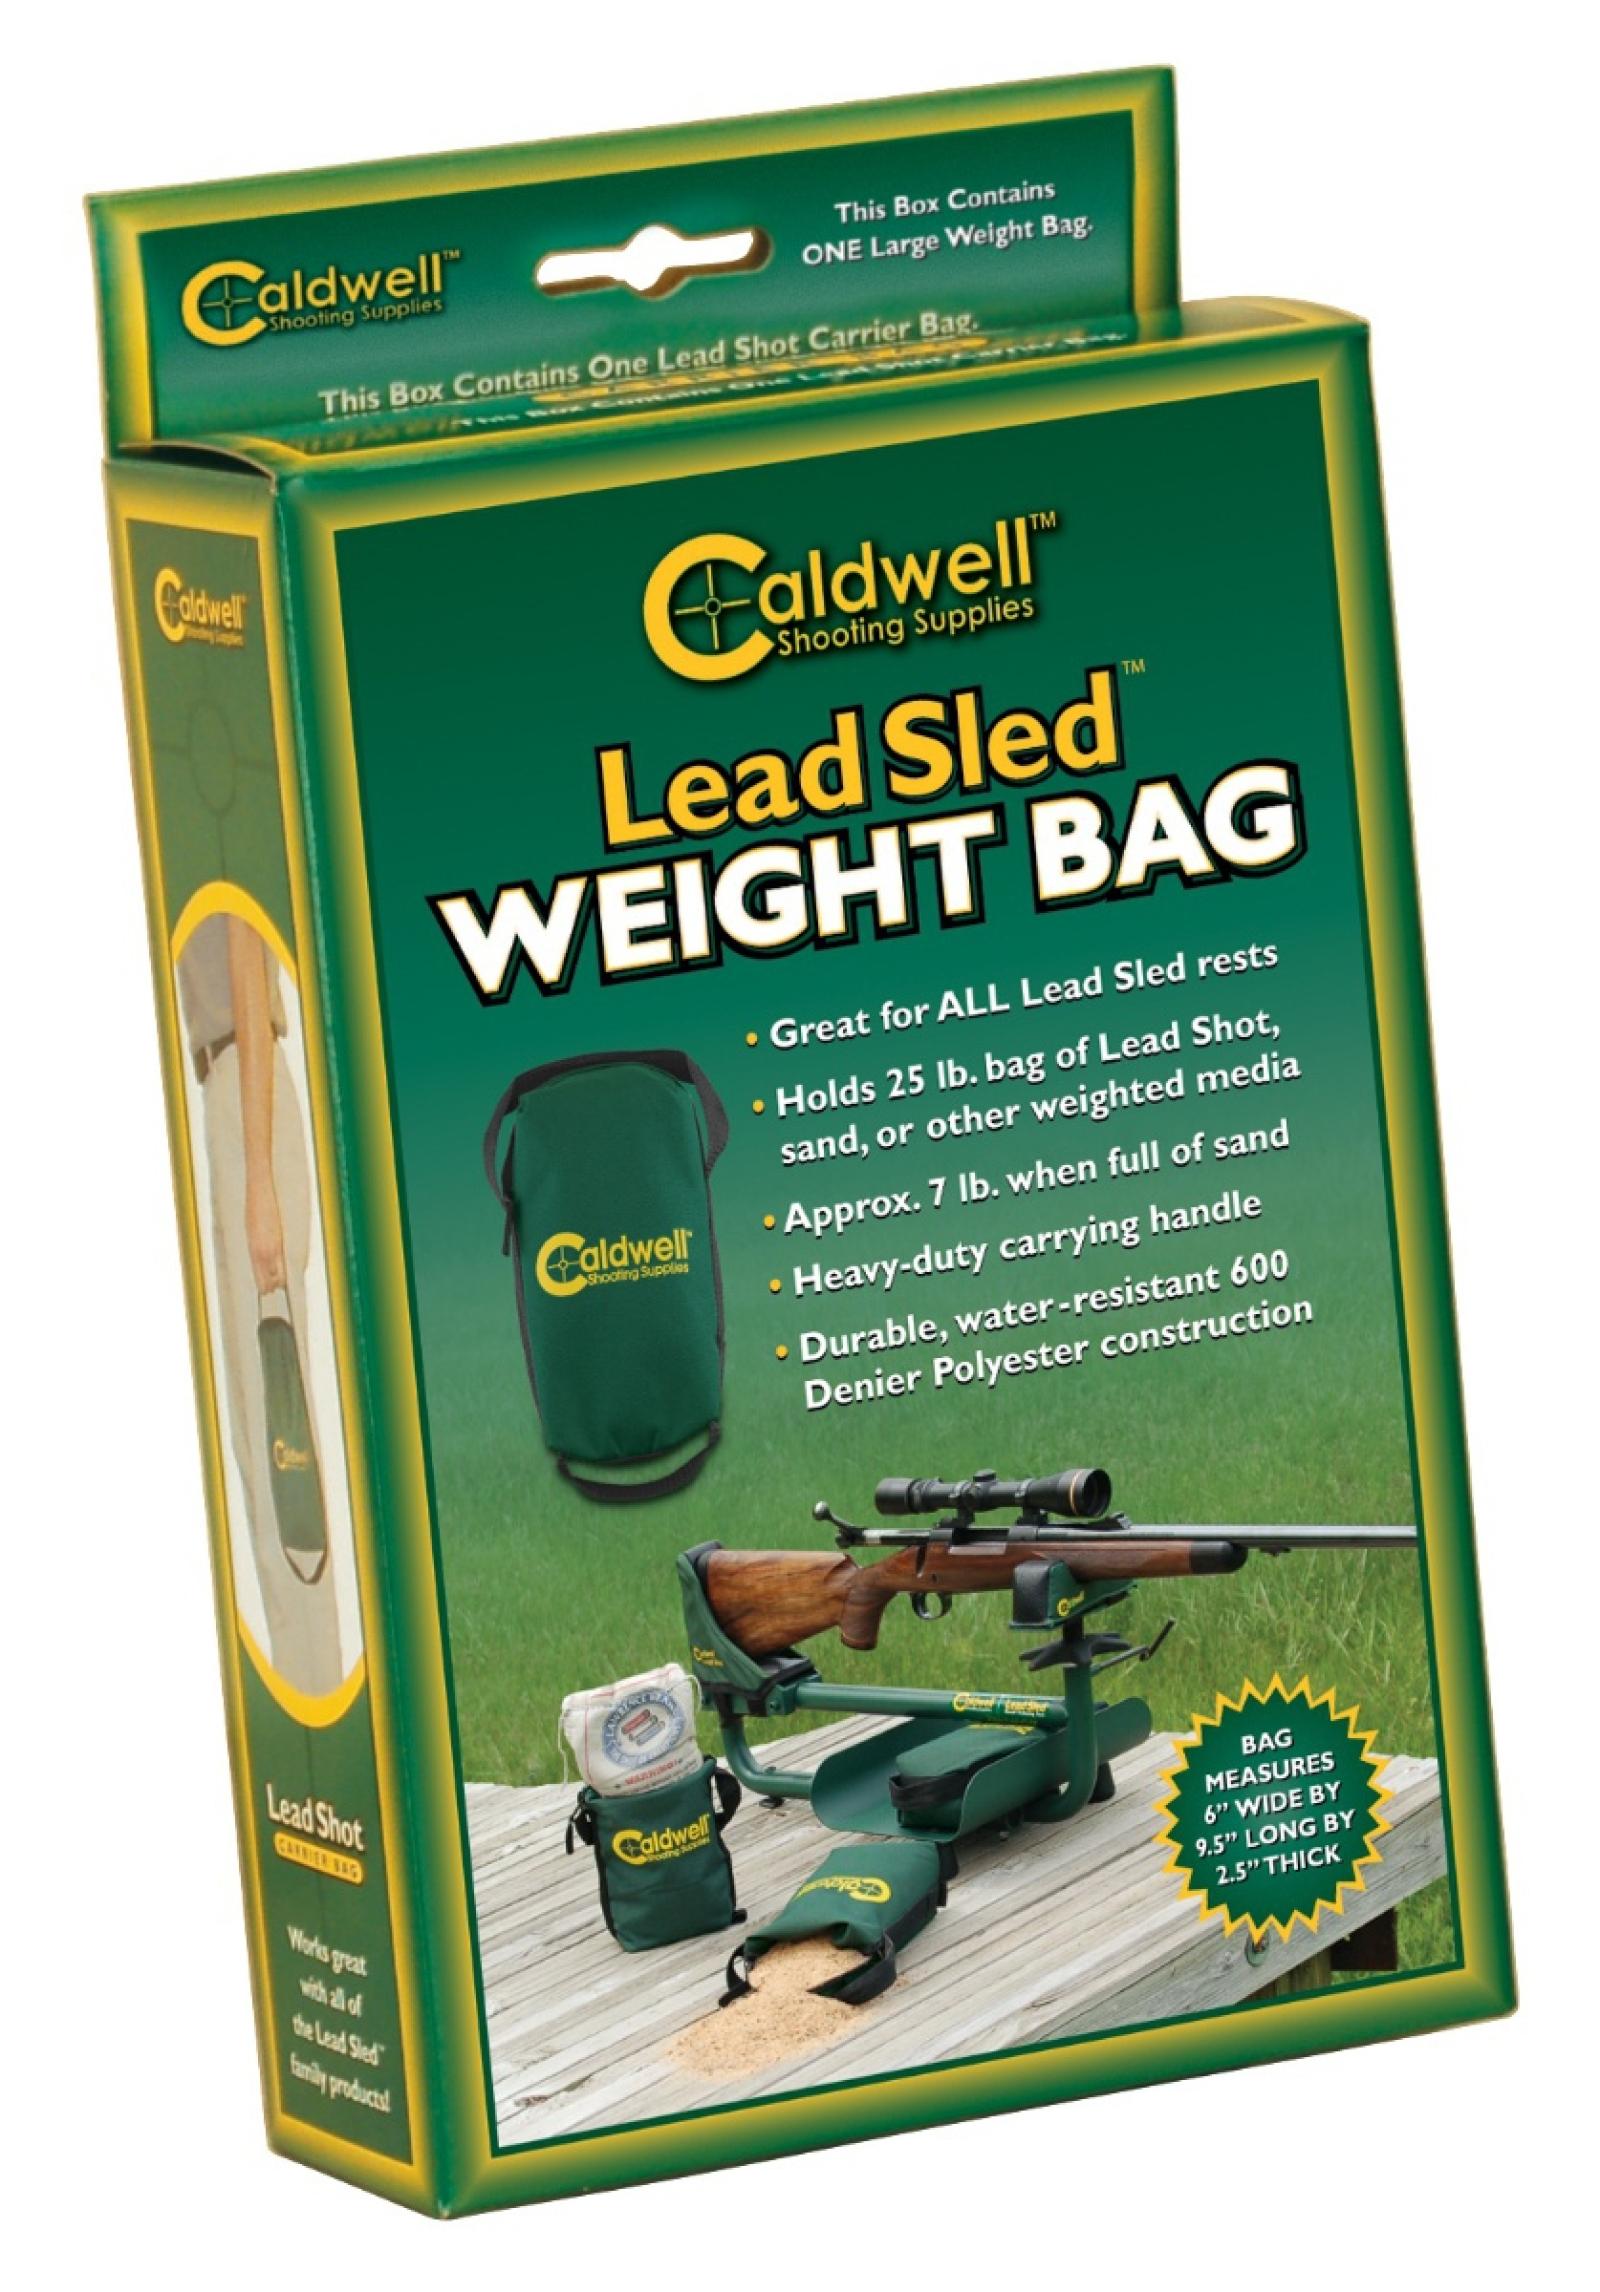 Lead Sled Weight Bag